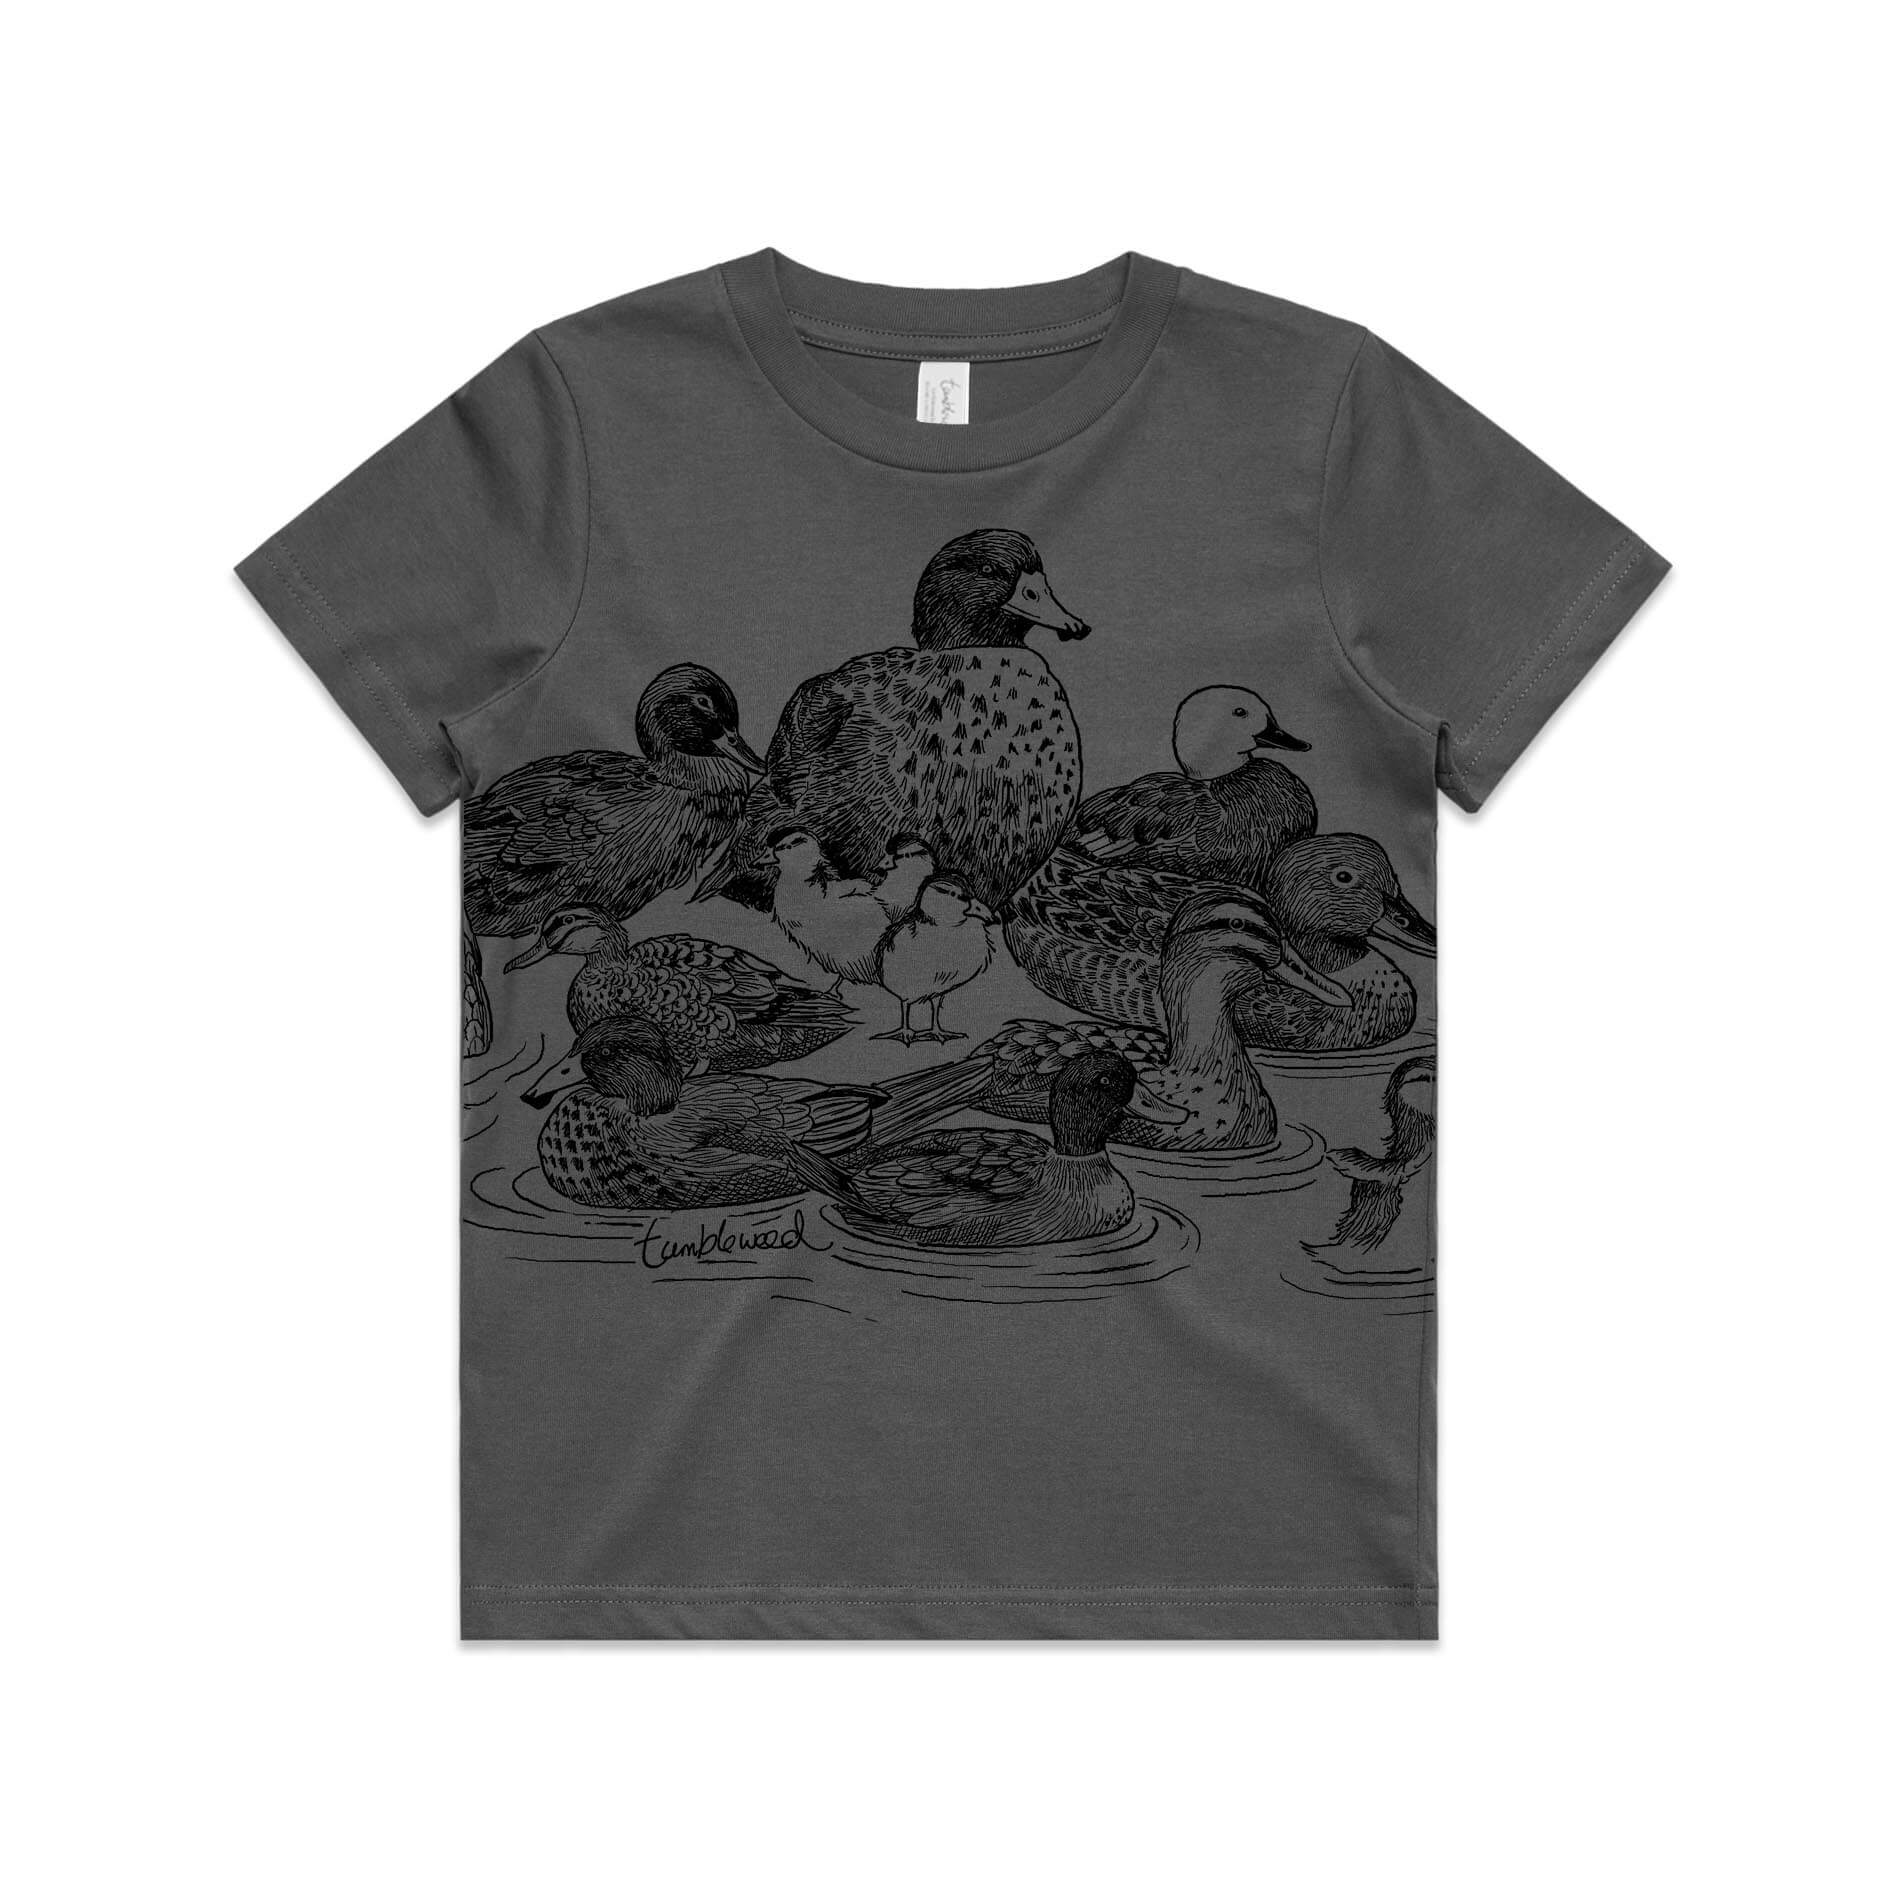 Charcoal, cotton kids' t-shirt with screen printed ducks design.